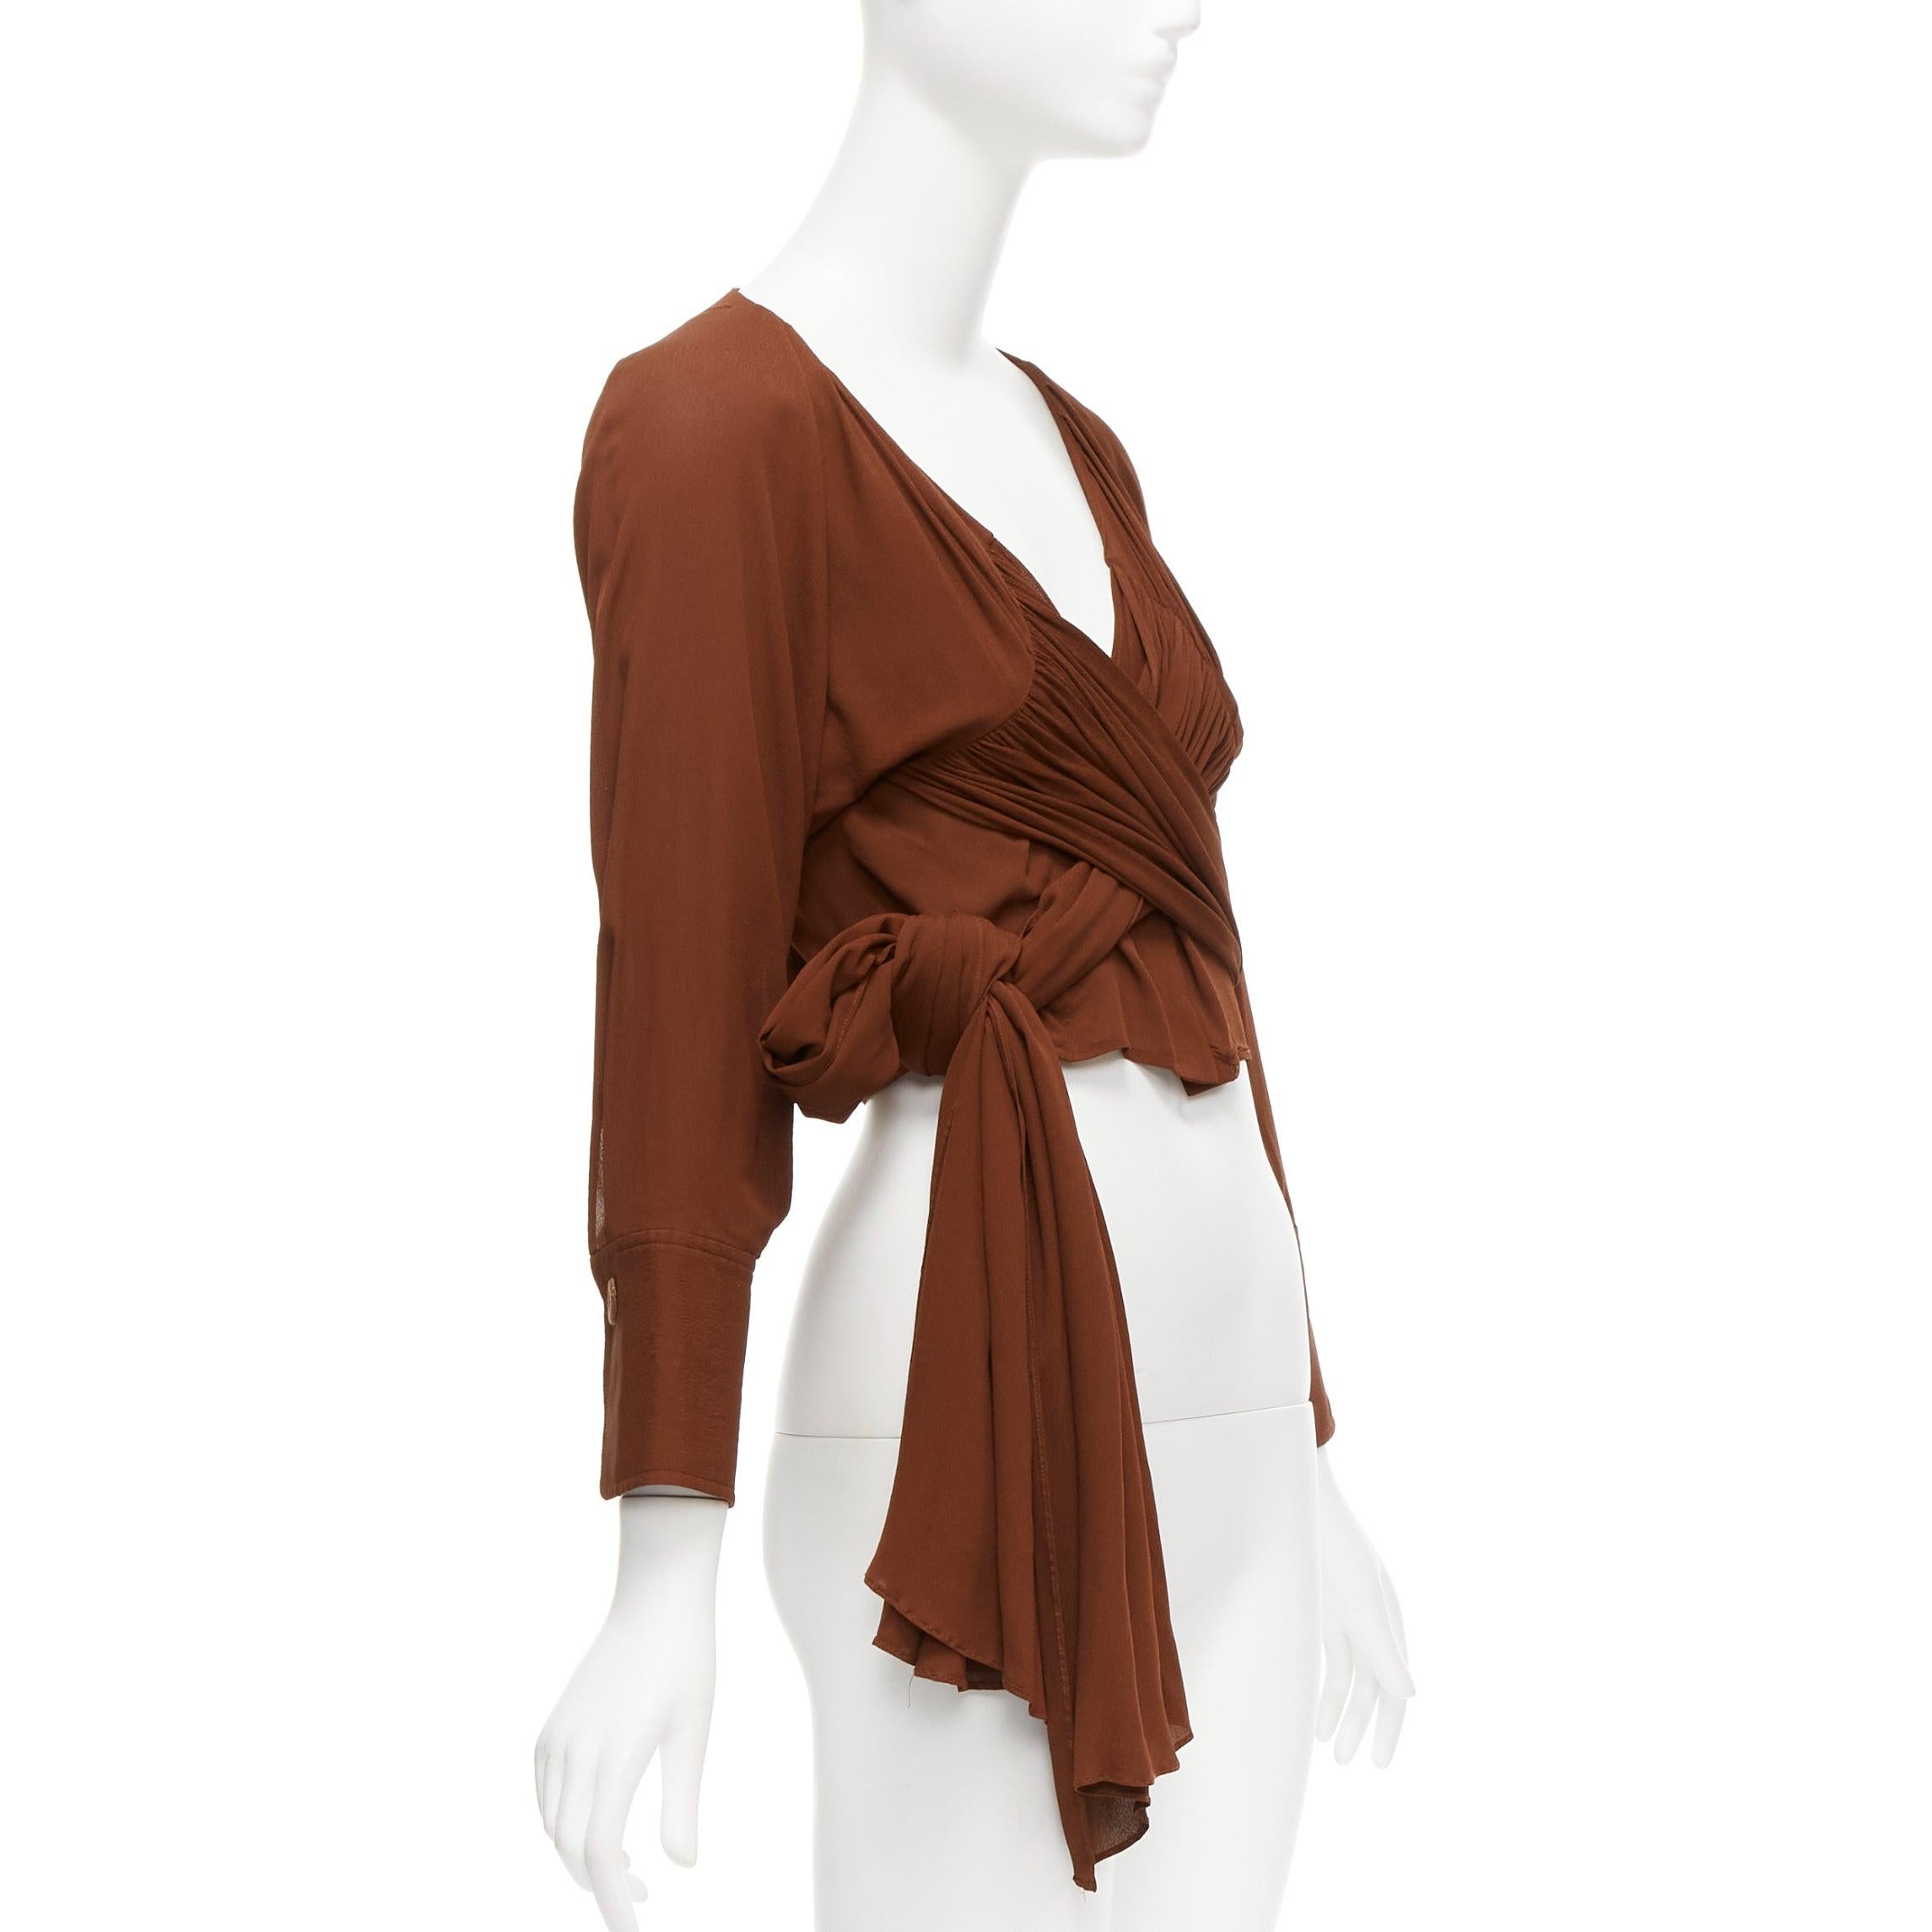 JACQUEMUS La Bomba brown viscose silky tie wrap crop shirt FR38 M
Reference: JACG/A00124
Brand: Jacquemus
Model: La Bomba
Material: Viscose
Color: Brown
Pattern: Solid
Closure: Wrap Tie
Extra Details: Wrap tie waist.
Made in: